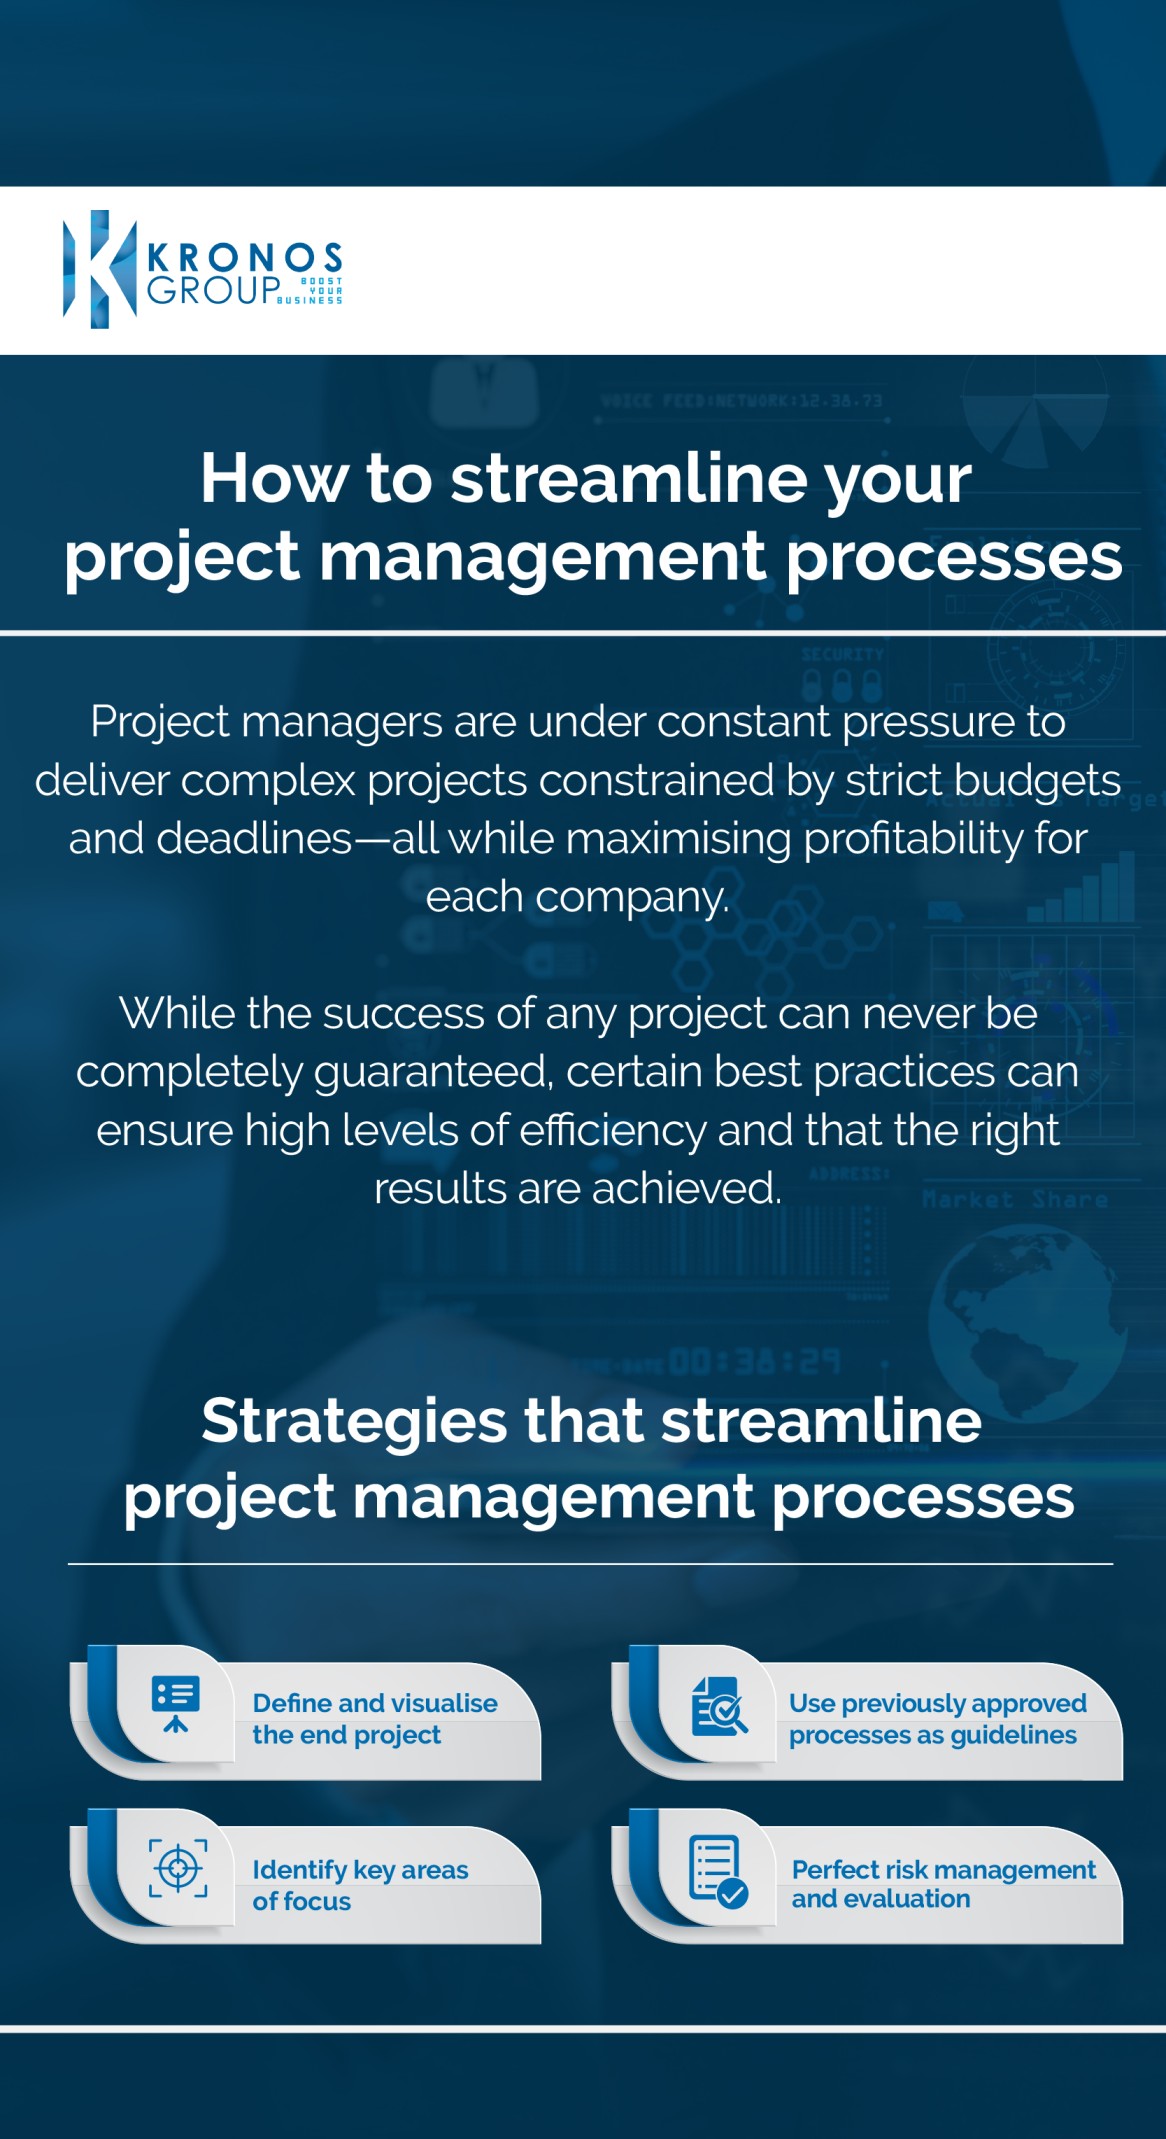 Kronos Group - how to enhance the value of your project management function